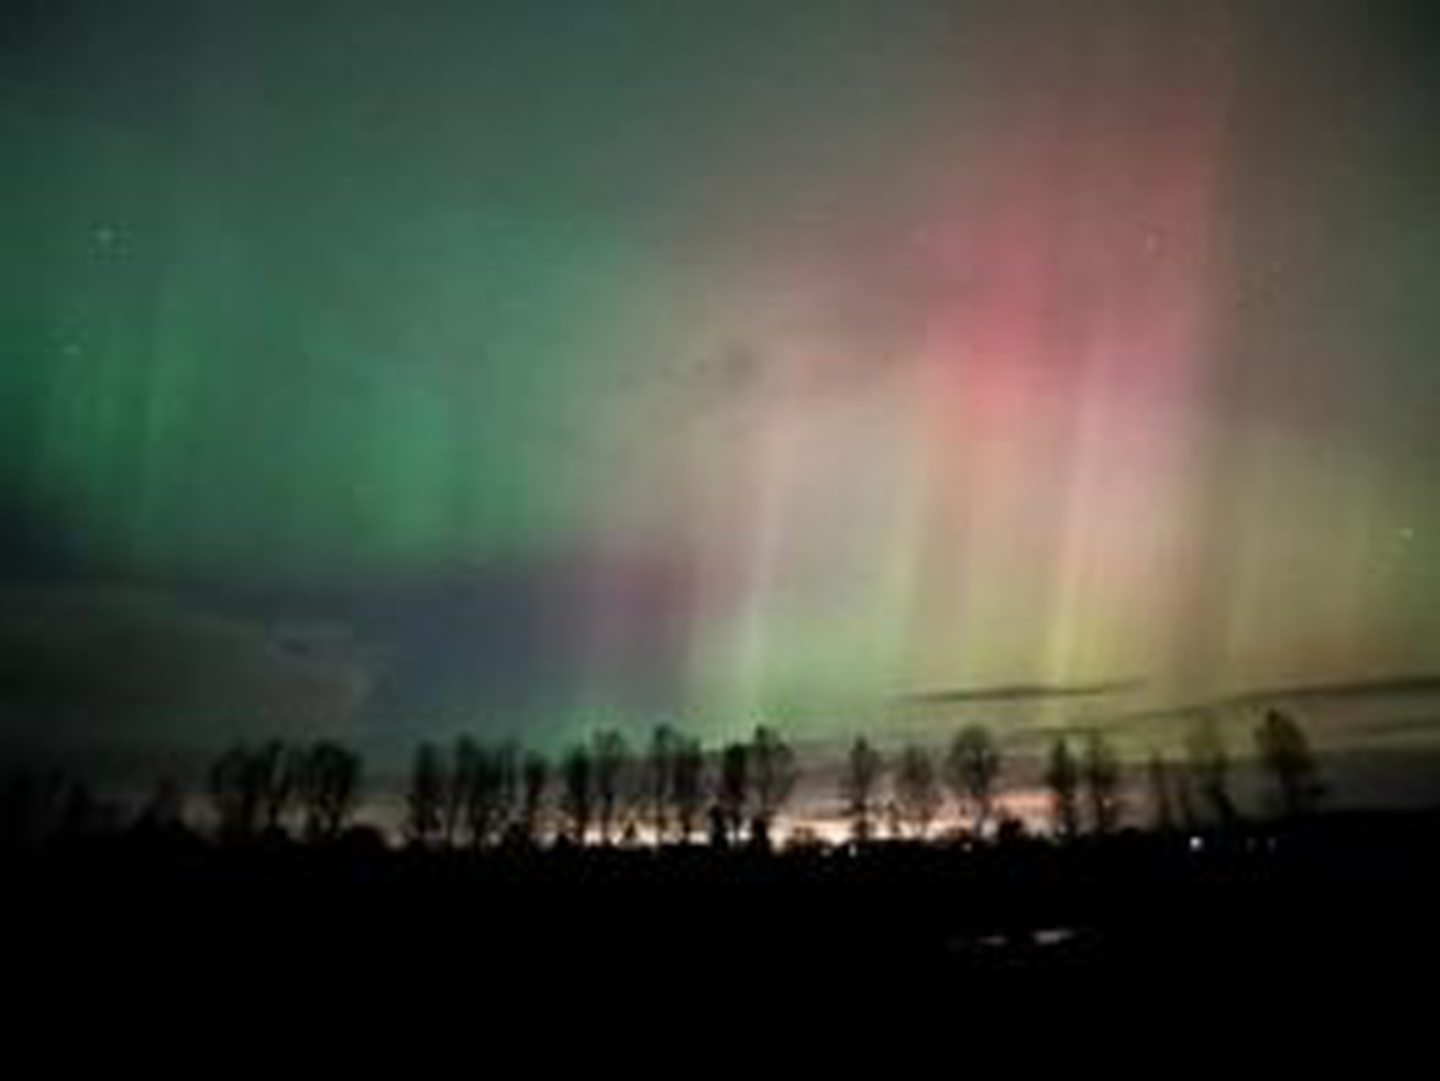 The northern lights by Craigo in Angus